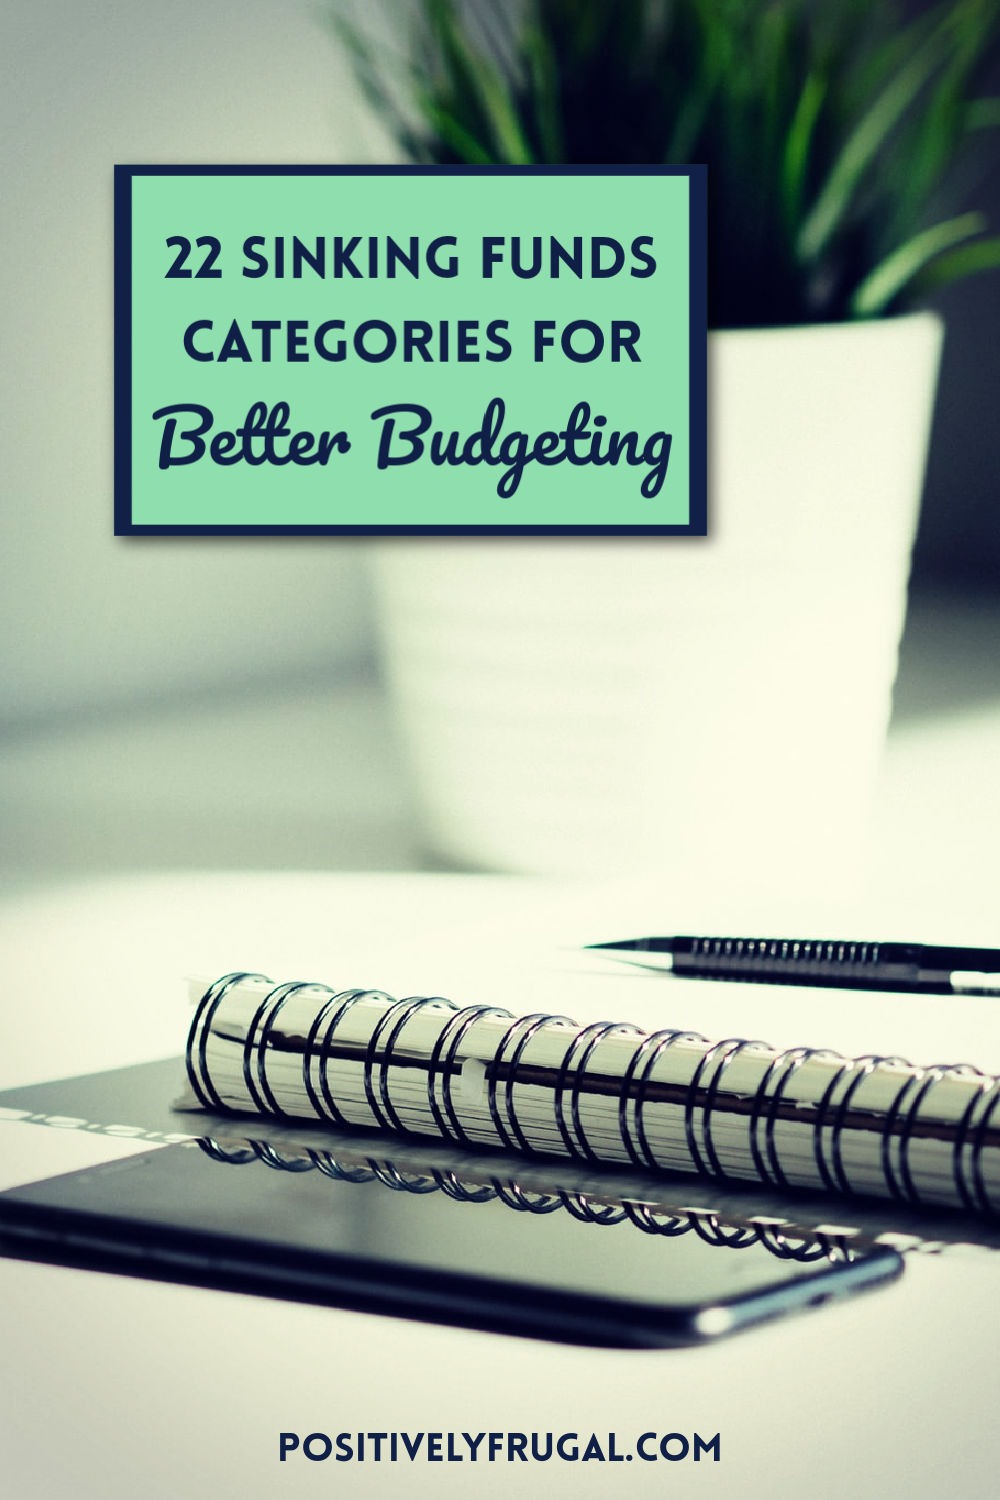 Sinking Funds Categories for Budgeting by PositivelyFrugal.com